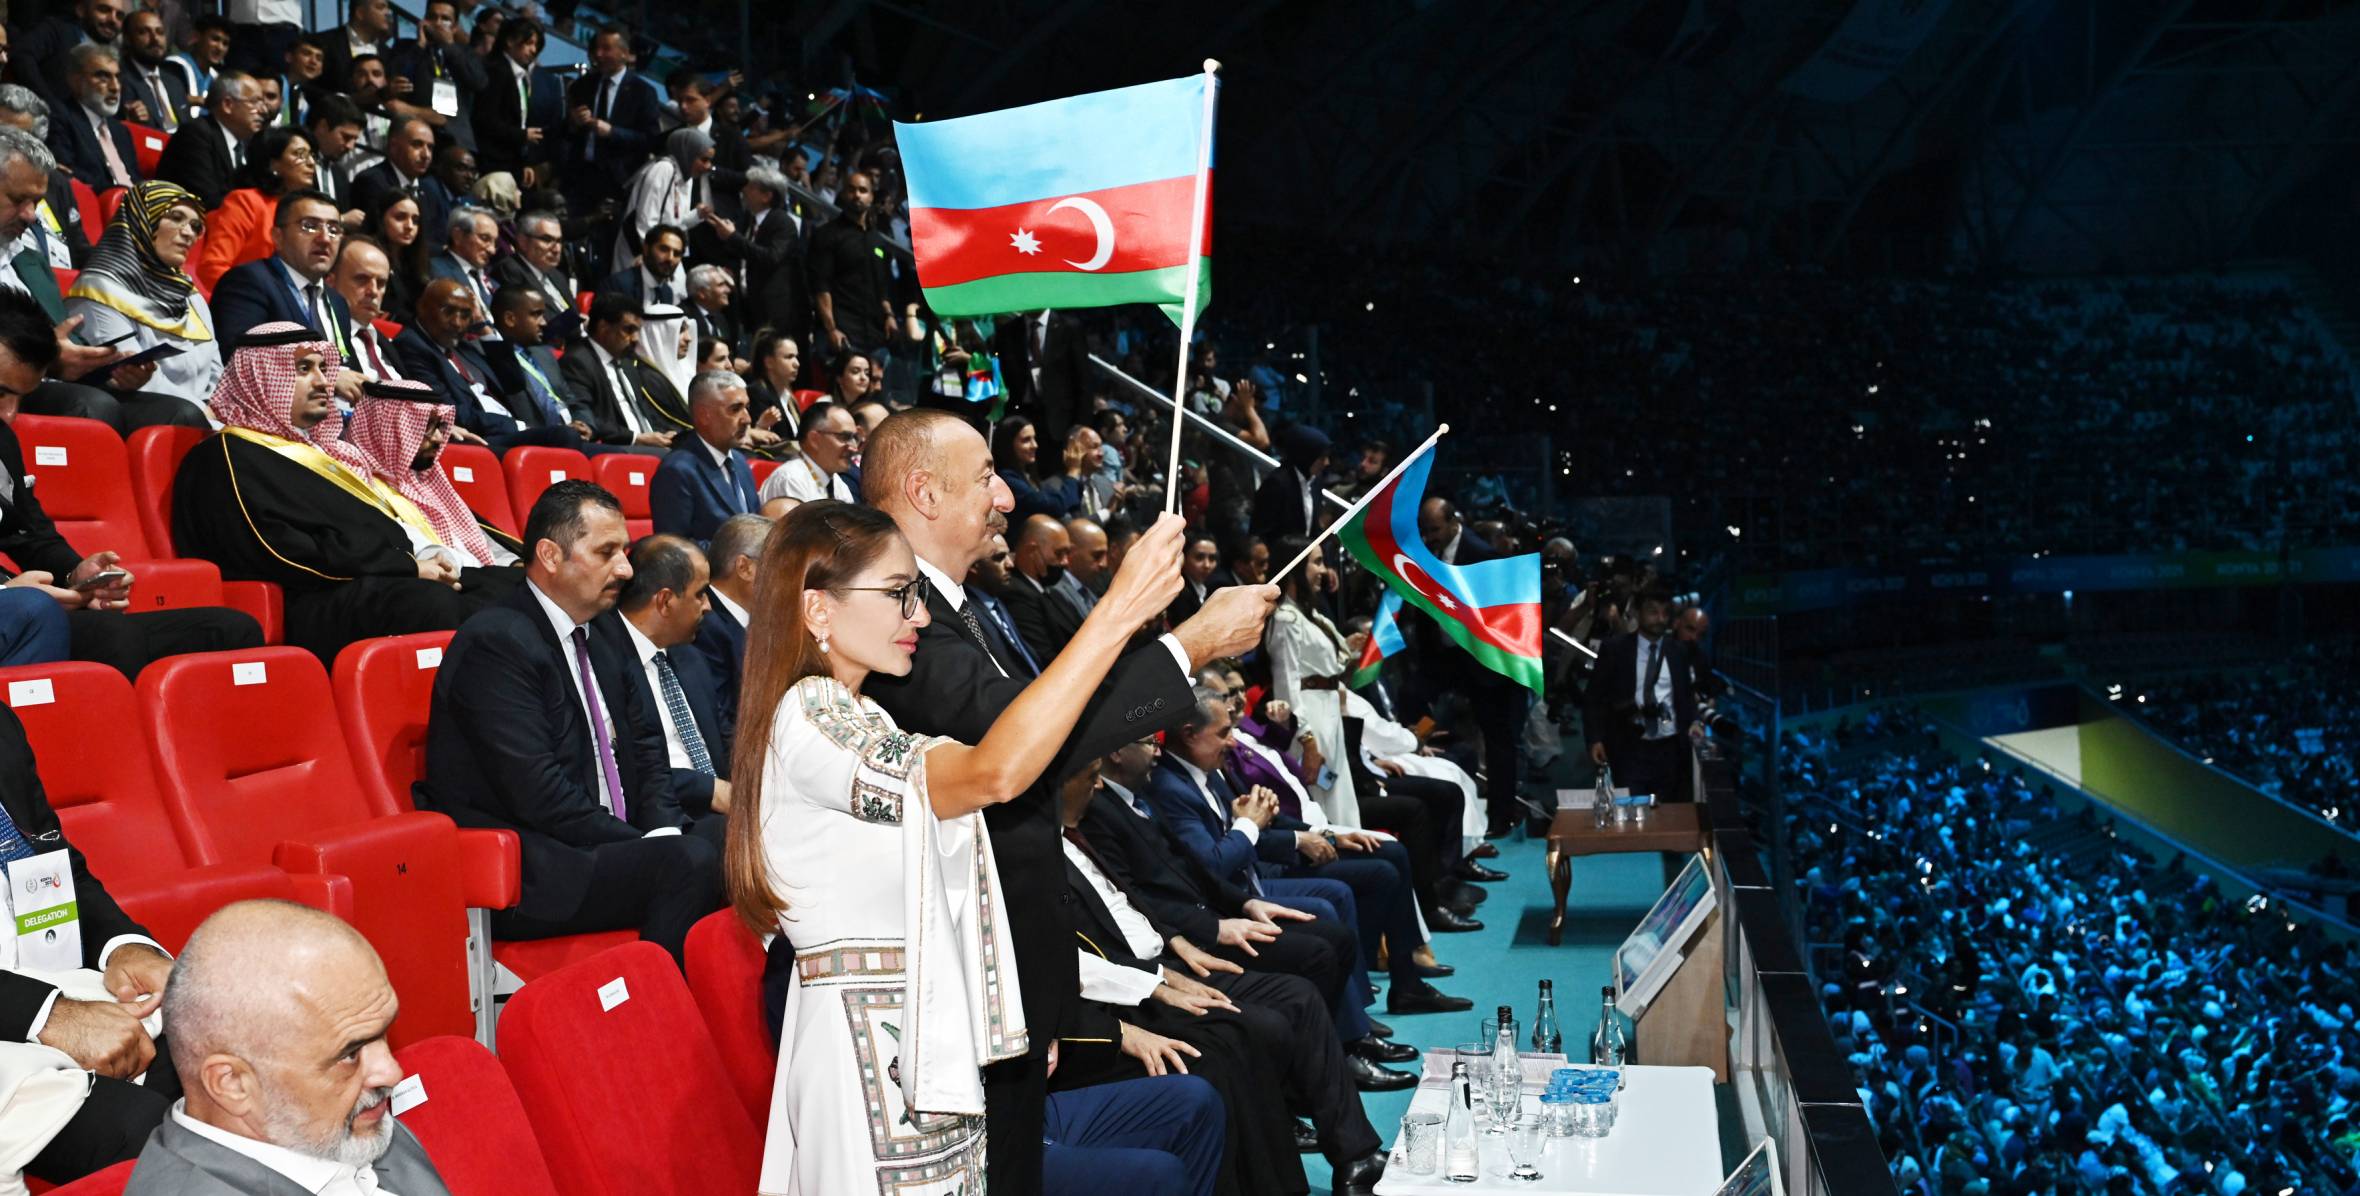 Konya hosted solemn opening ceremony of 5th Islamic Solidarity Games